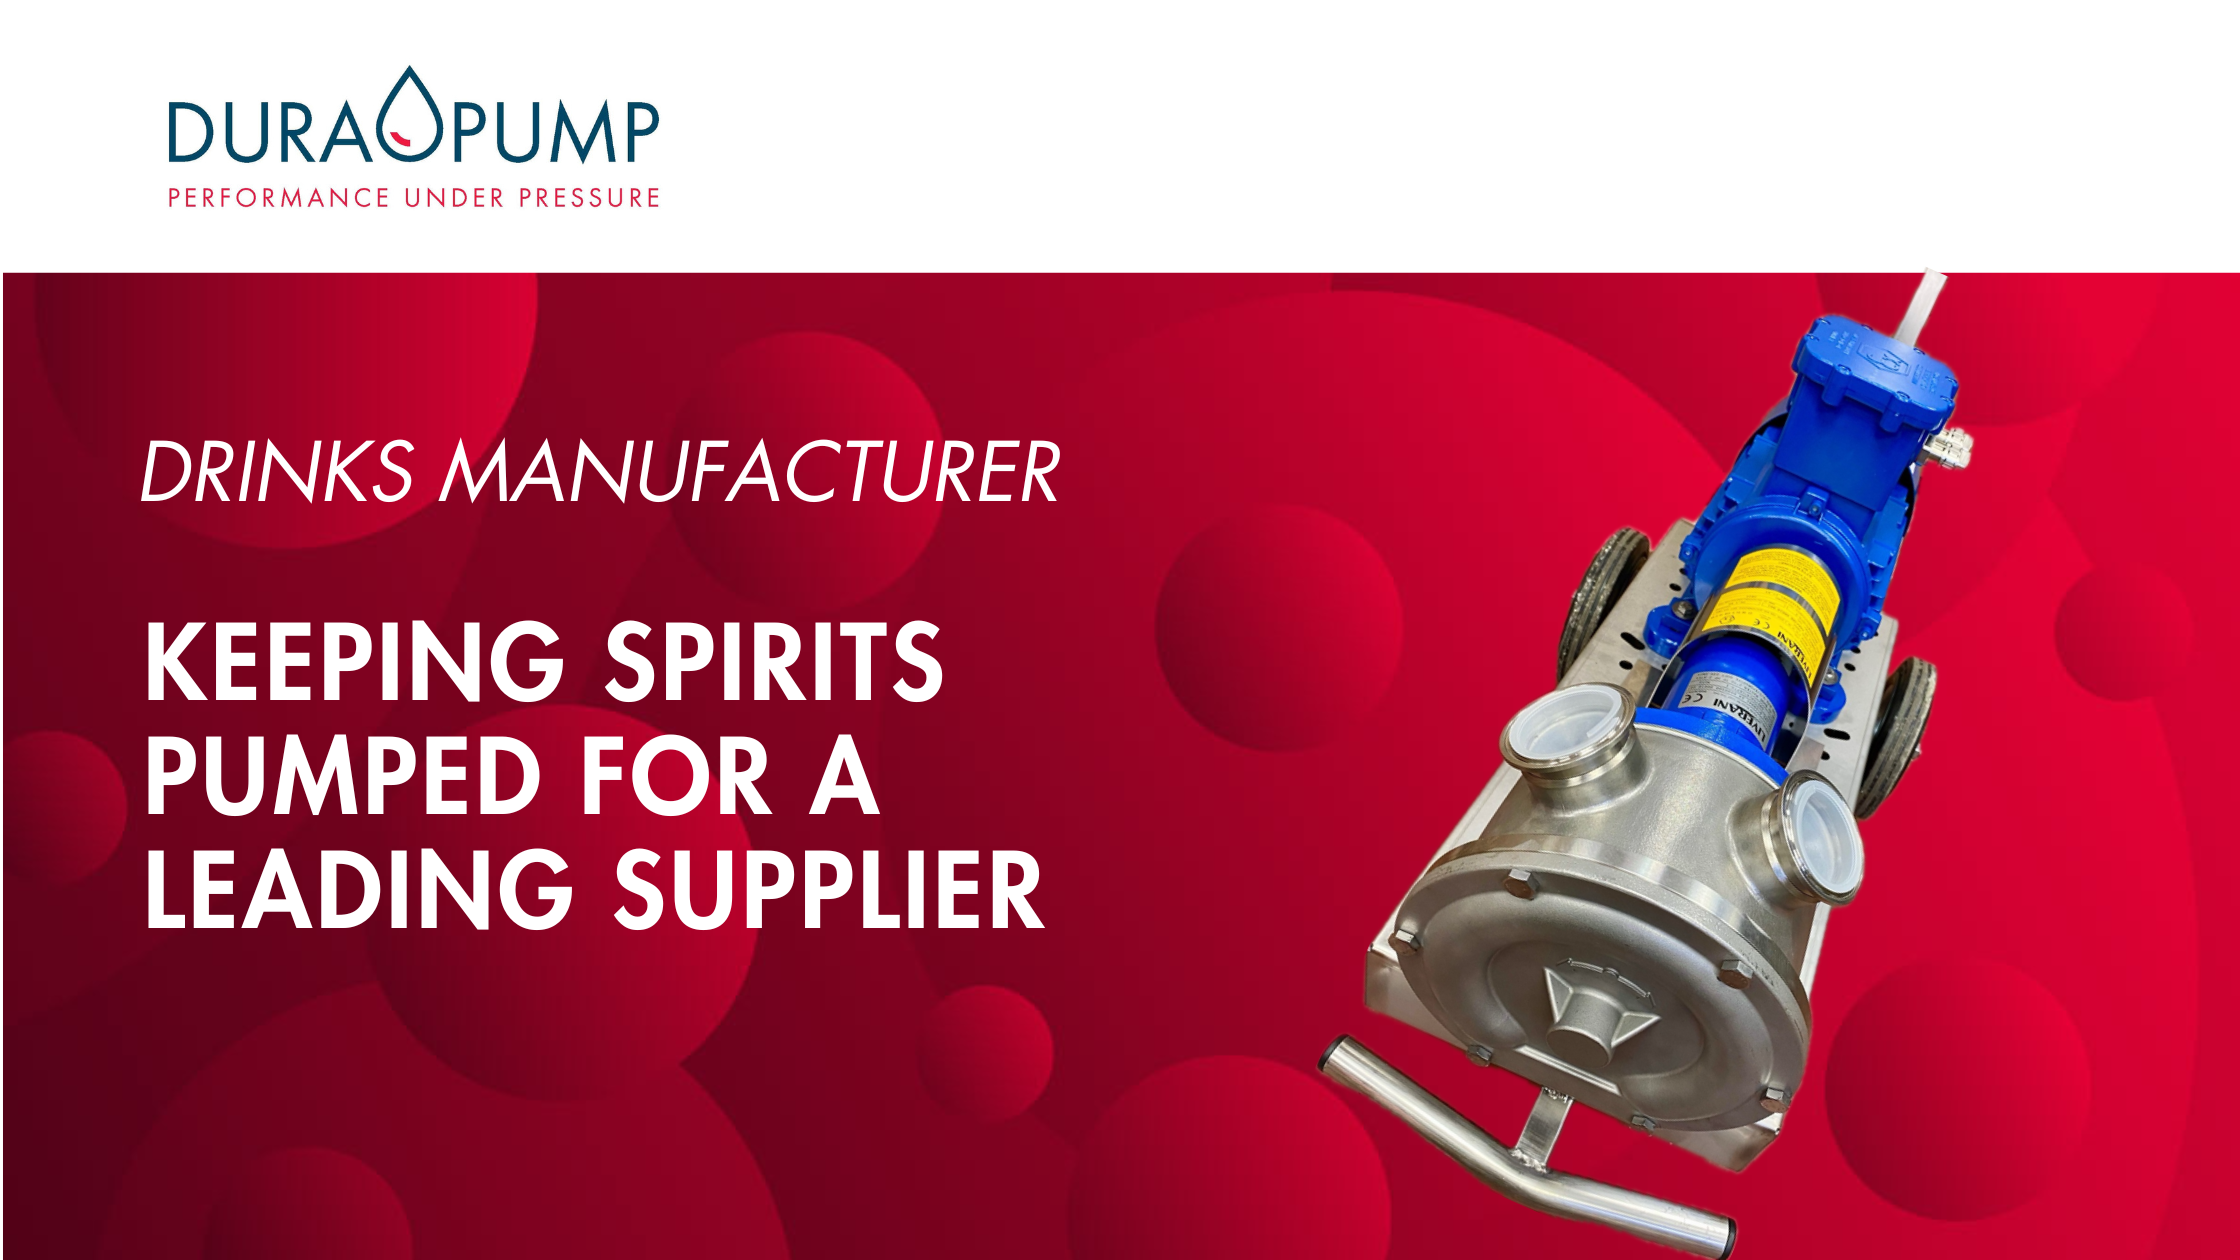 Keeping spirits pumped for a leading supplier